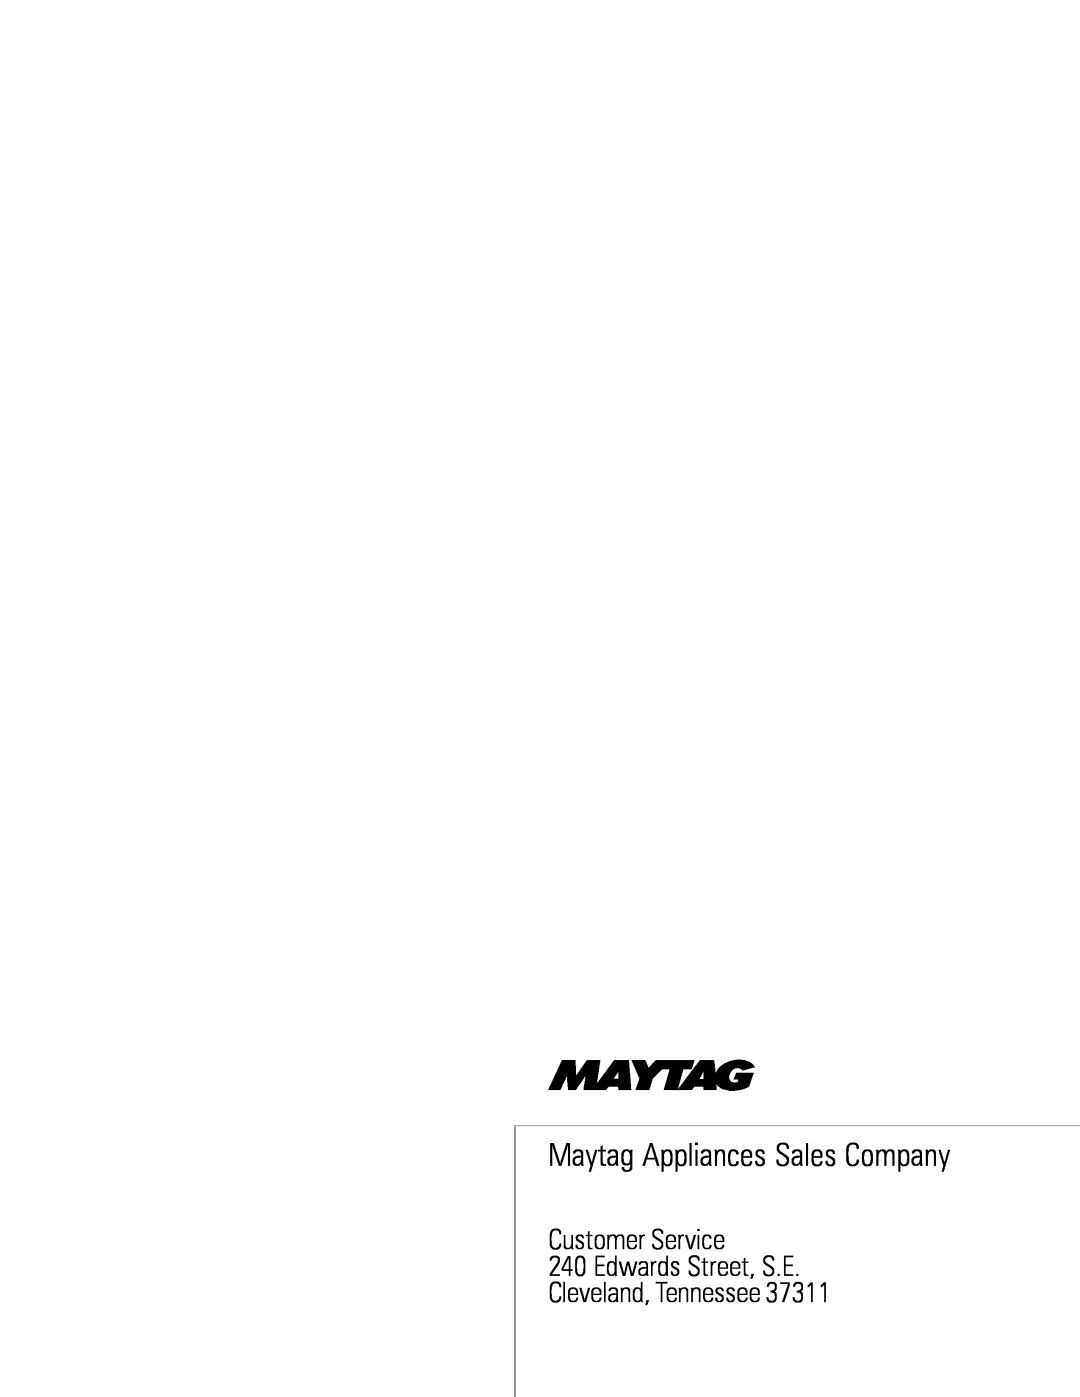 Whirlpool MAH3000 Maytag Appliances Sales Company, Customer Service 240 Edwards Street, S.E Cleveland, Tennessee 